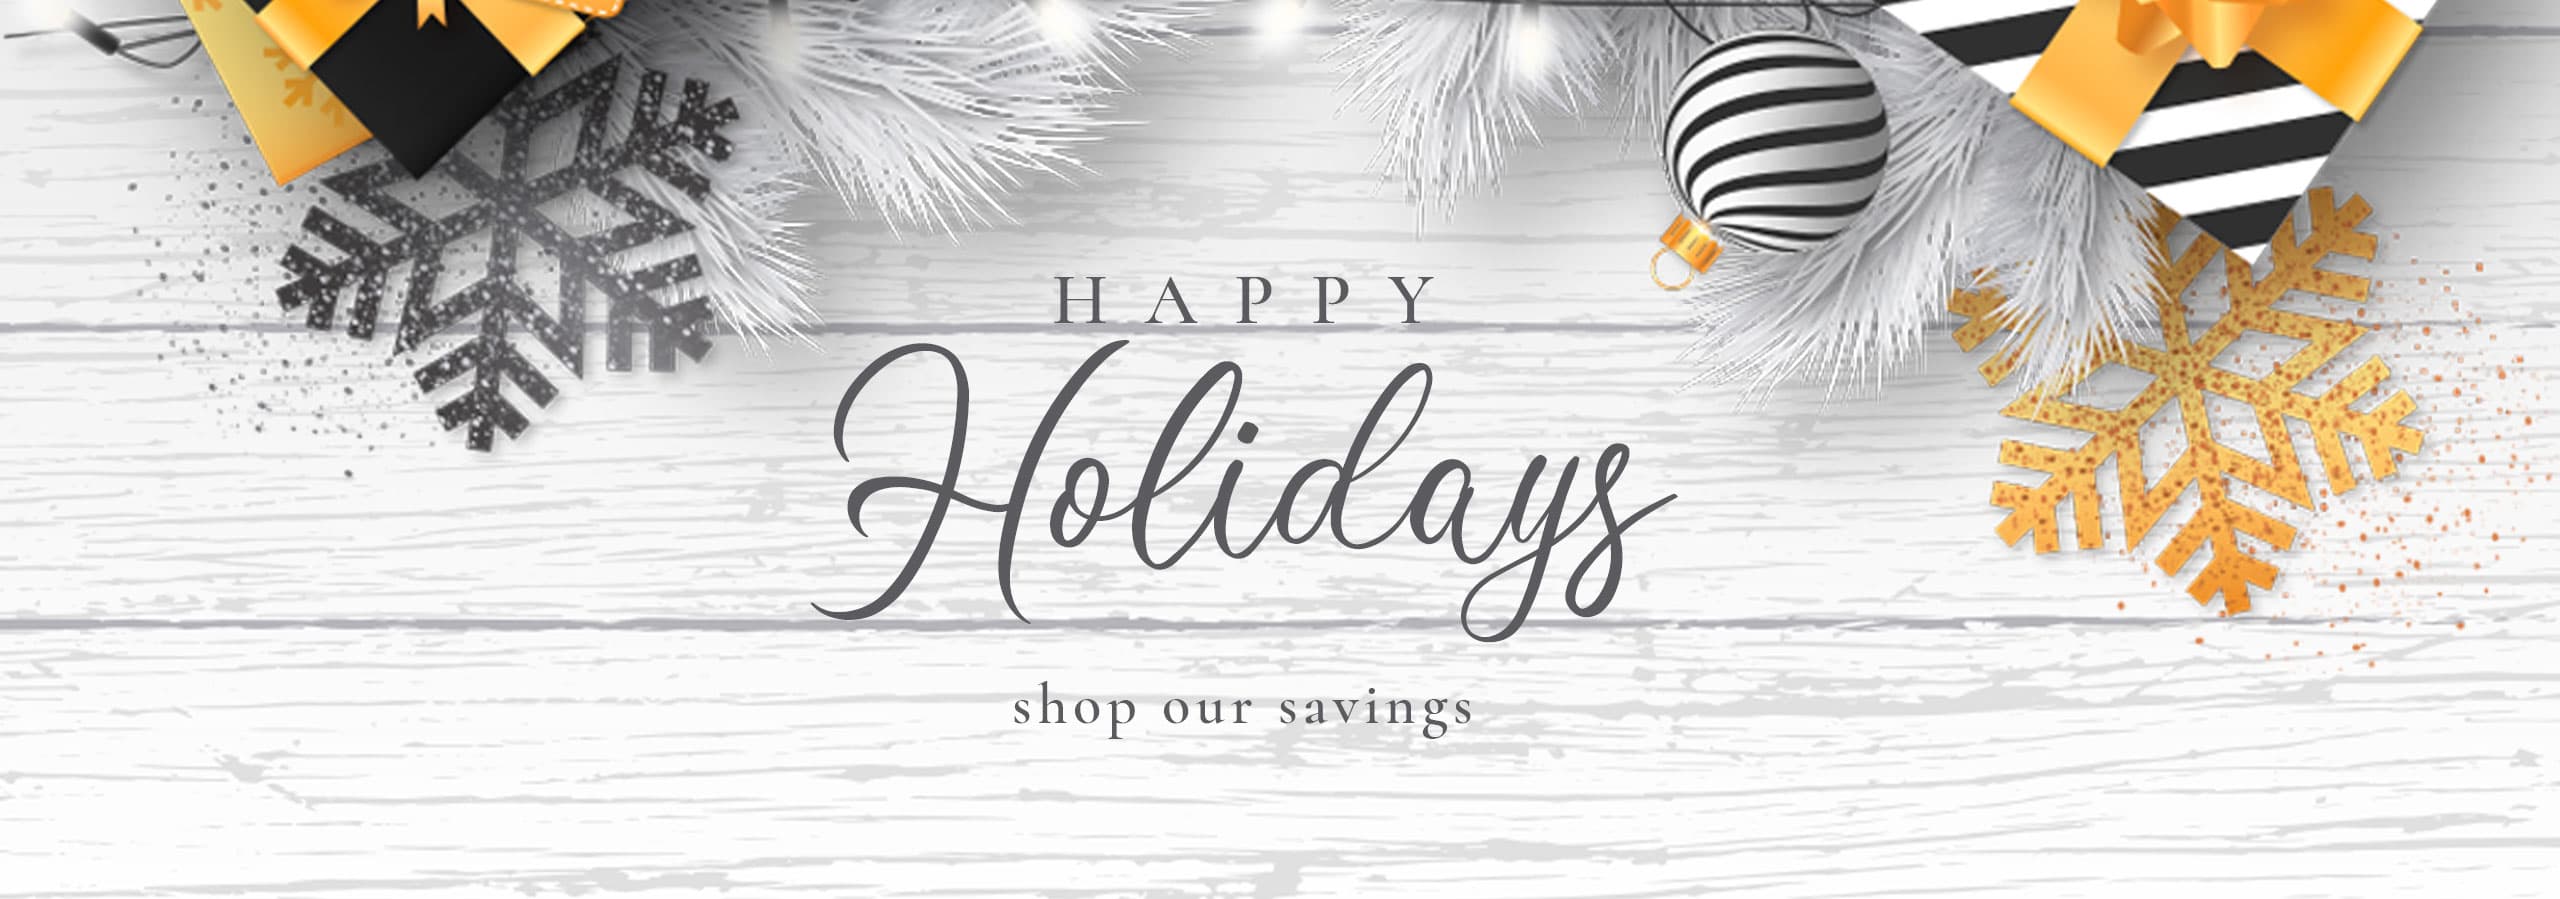 Happy Holidays - Shop our savings